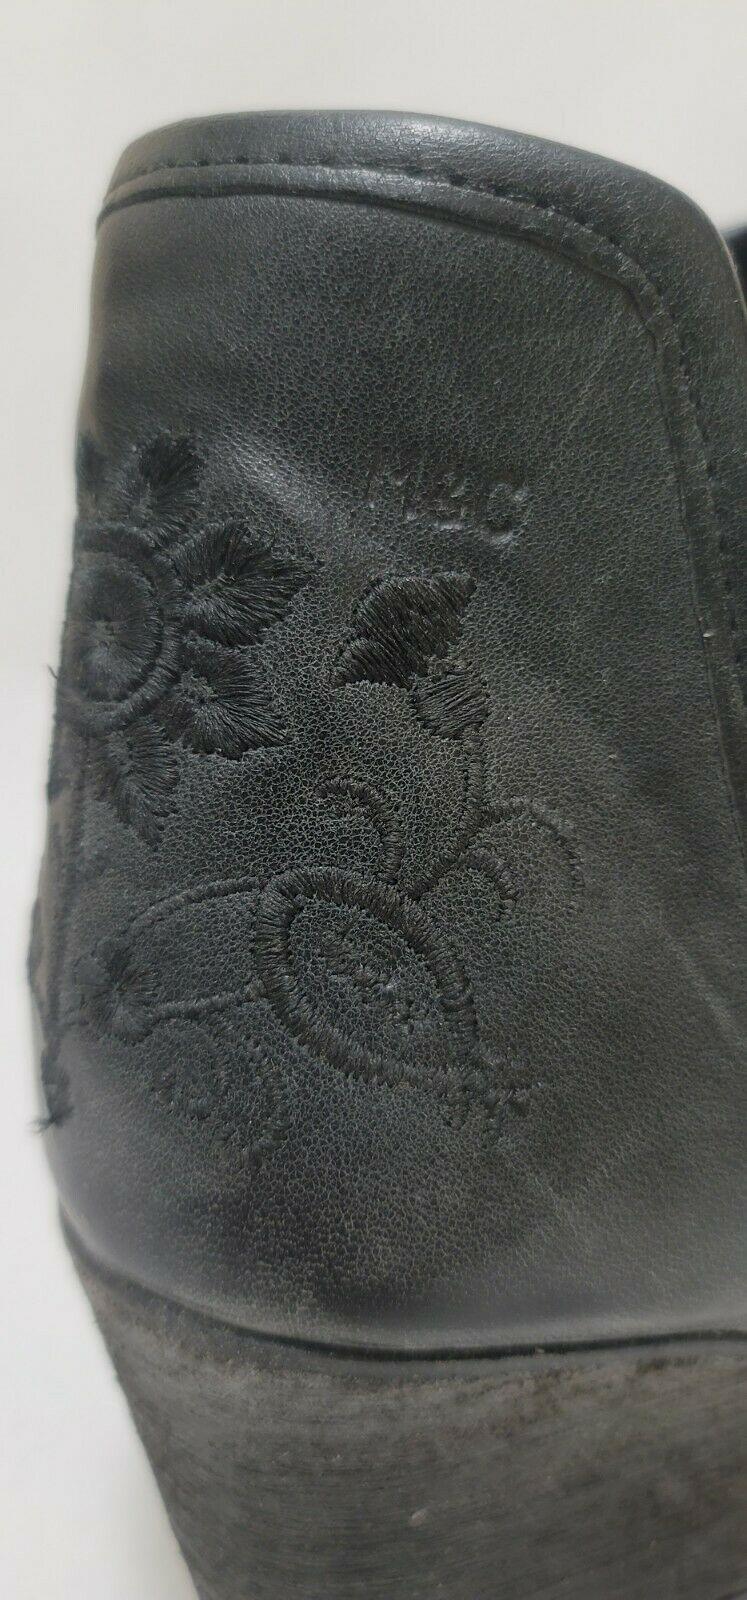 Musse & Cloud Ashlia Leather Embroidered Black Ankle Booties Size US 8 - SVNYFancy